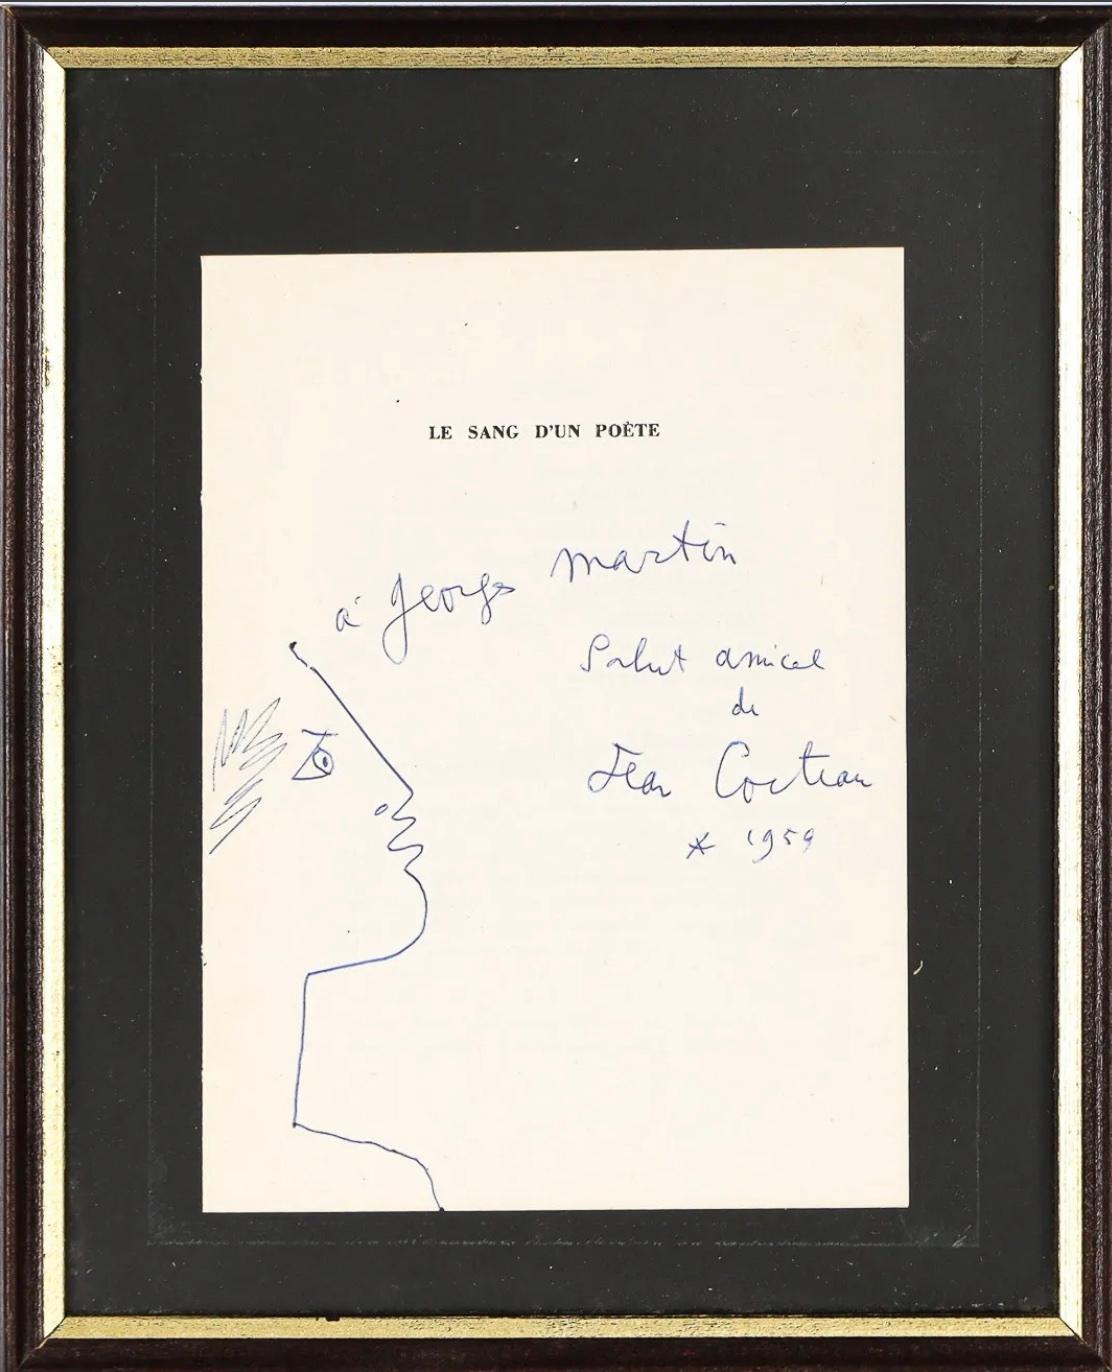 
Jean Cocteau (1889-1963), Profile with Laurel Wreath, 1959. Blue Ink on flyleaf of the book, 